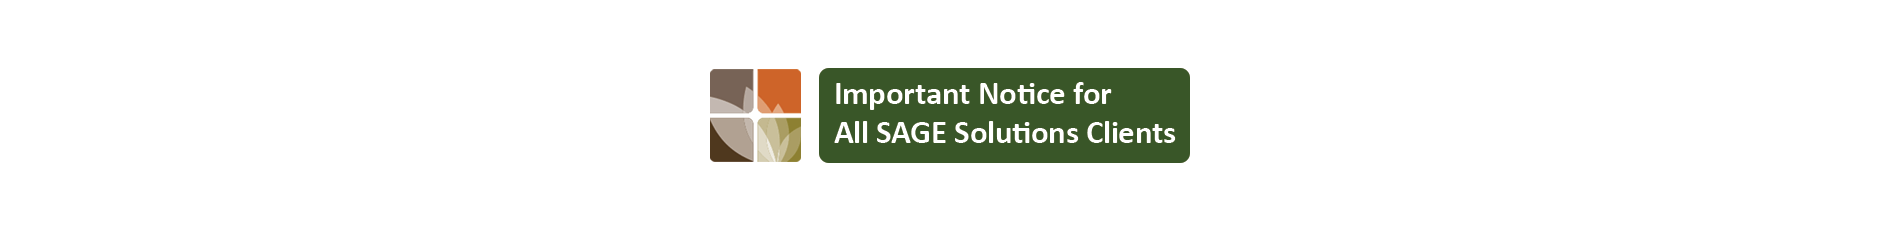 Important Notice for All SAGE Solutions Clients